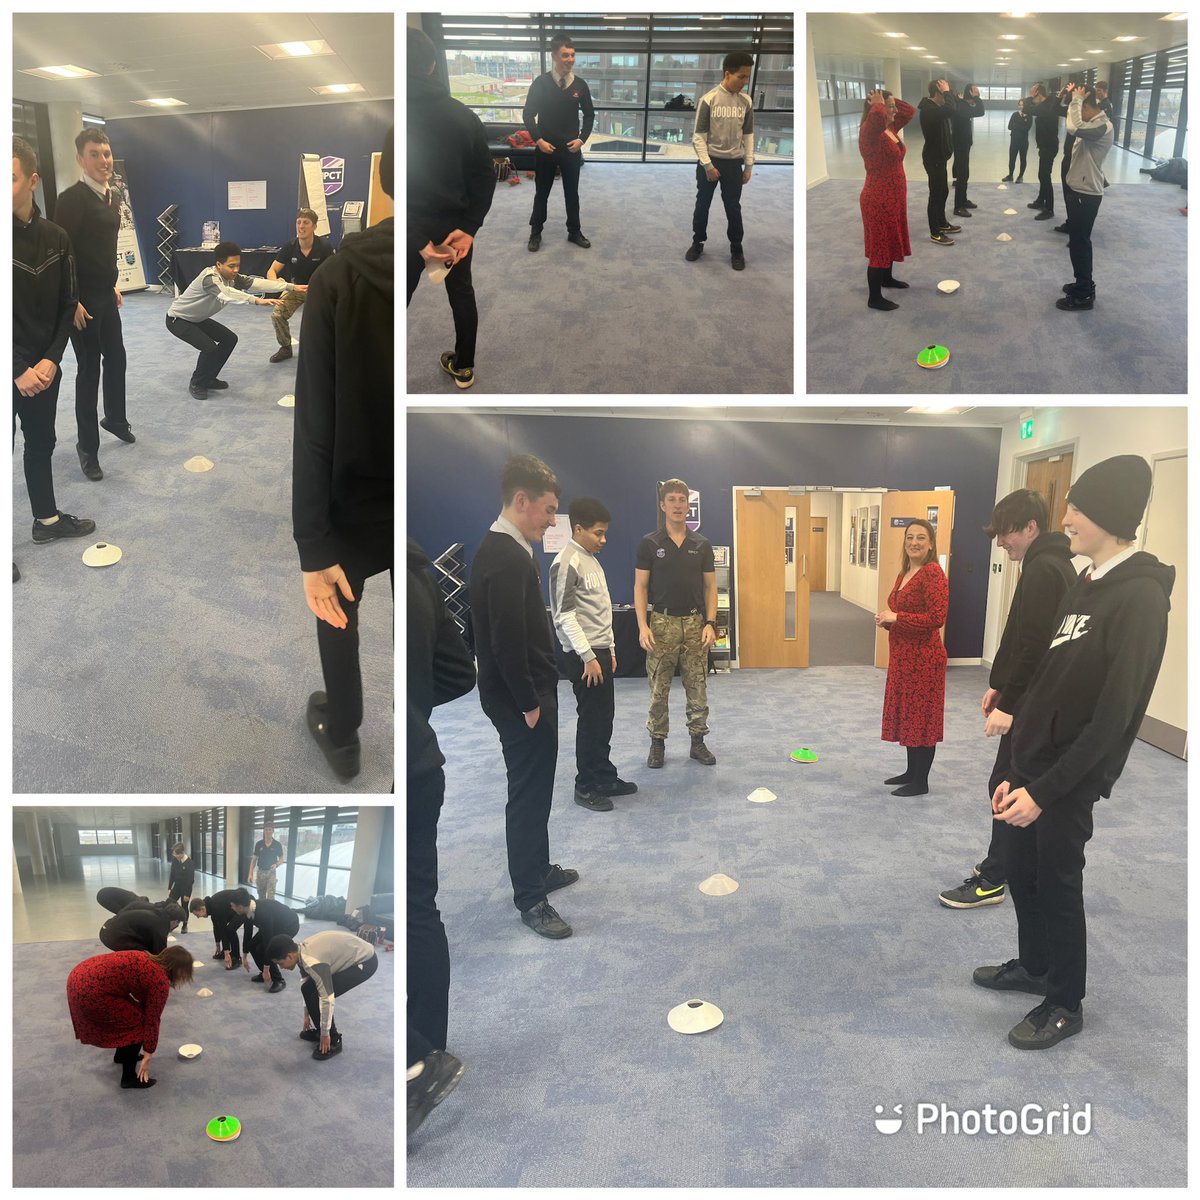 Thank you to @mpctschools for allowing us to visit with some year 9 and 10 pupils today. I think Mrs Pearce may have enjoyed the activities more than the pupils!